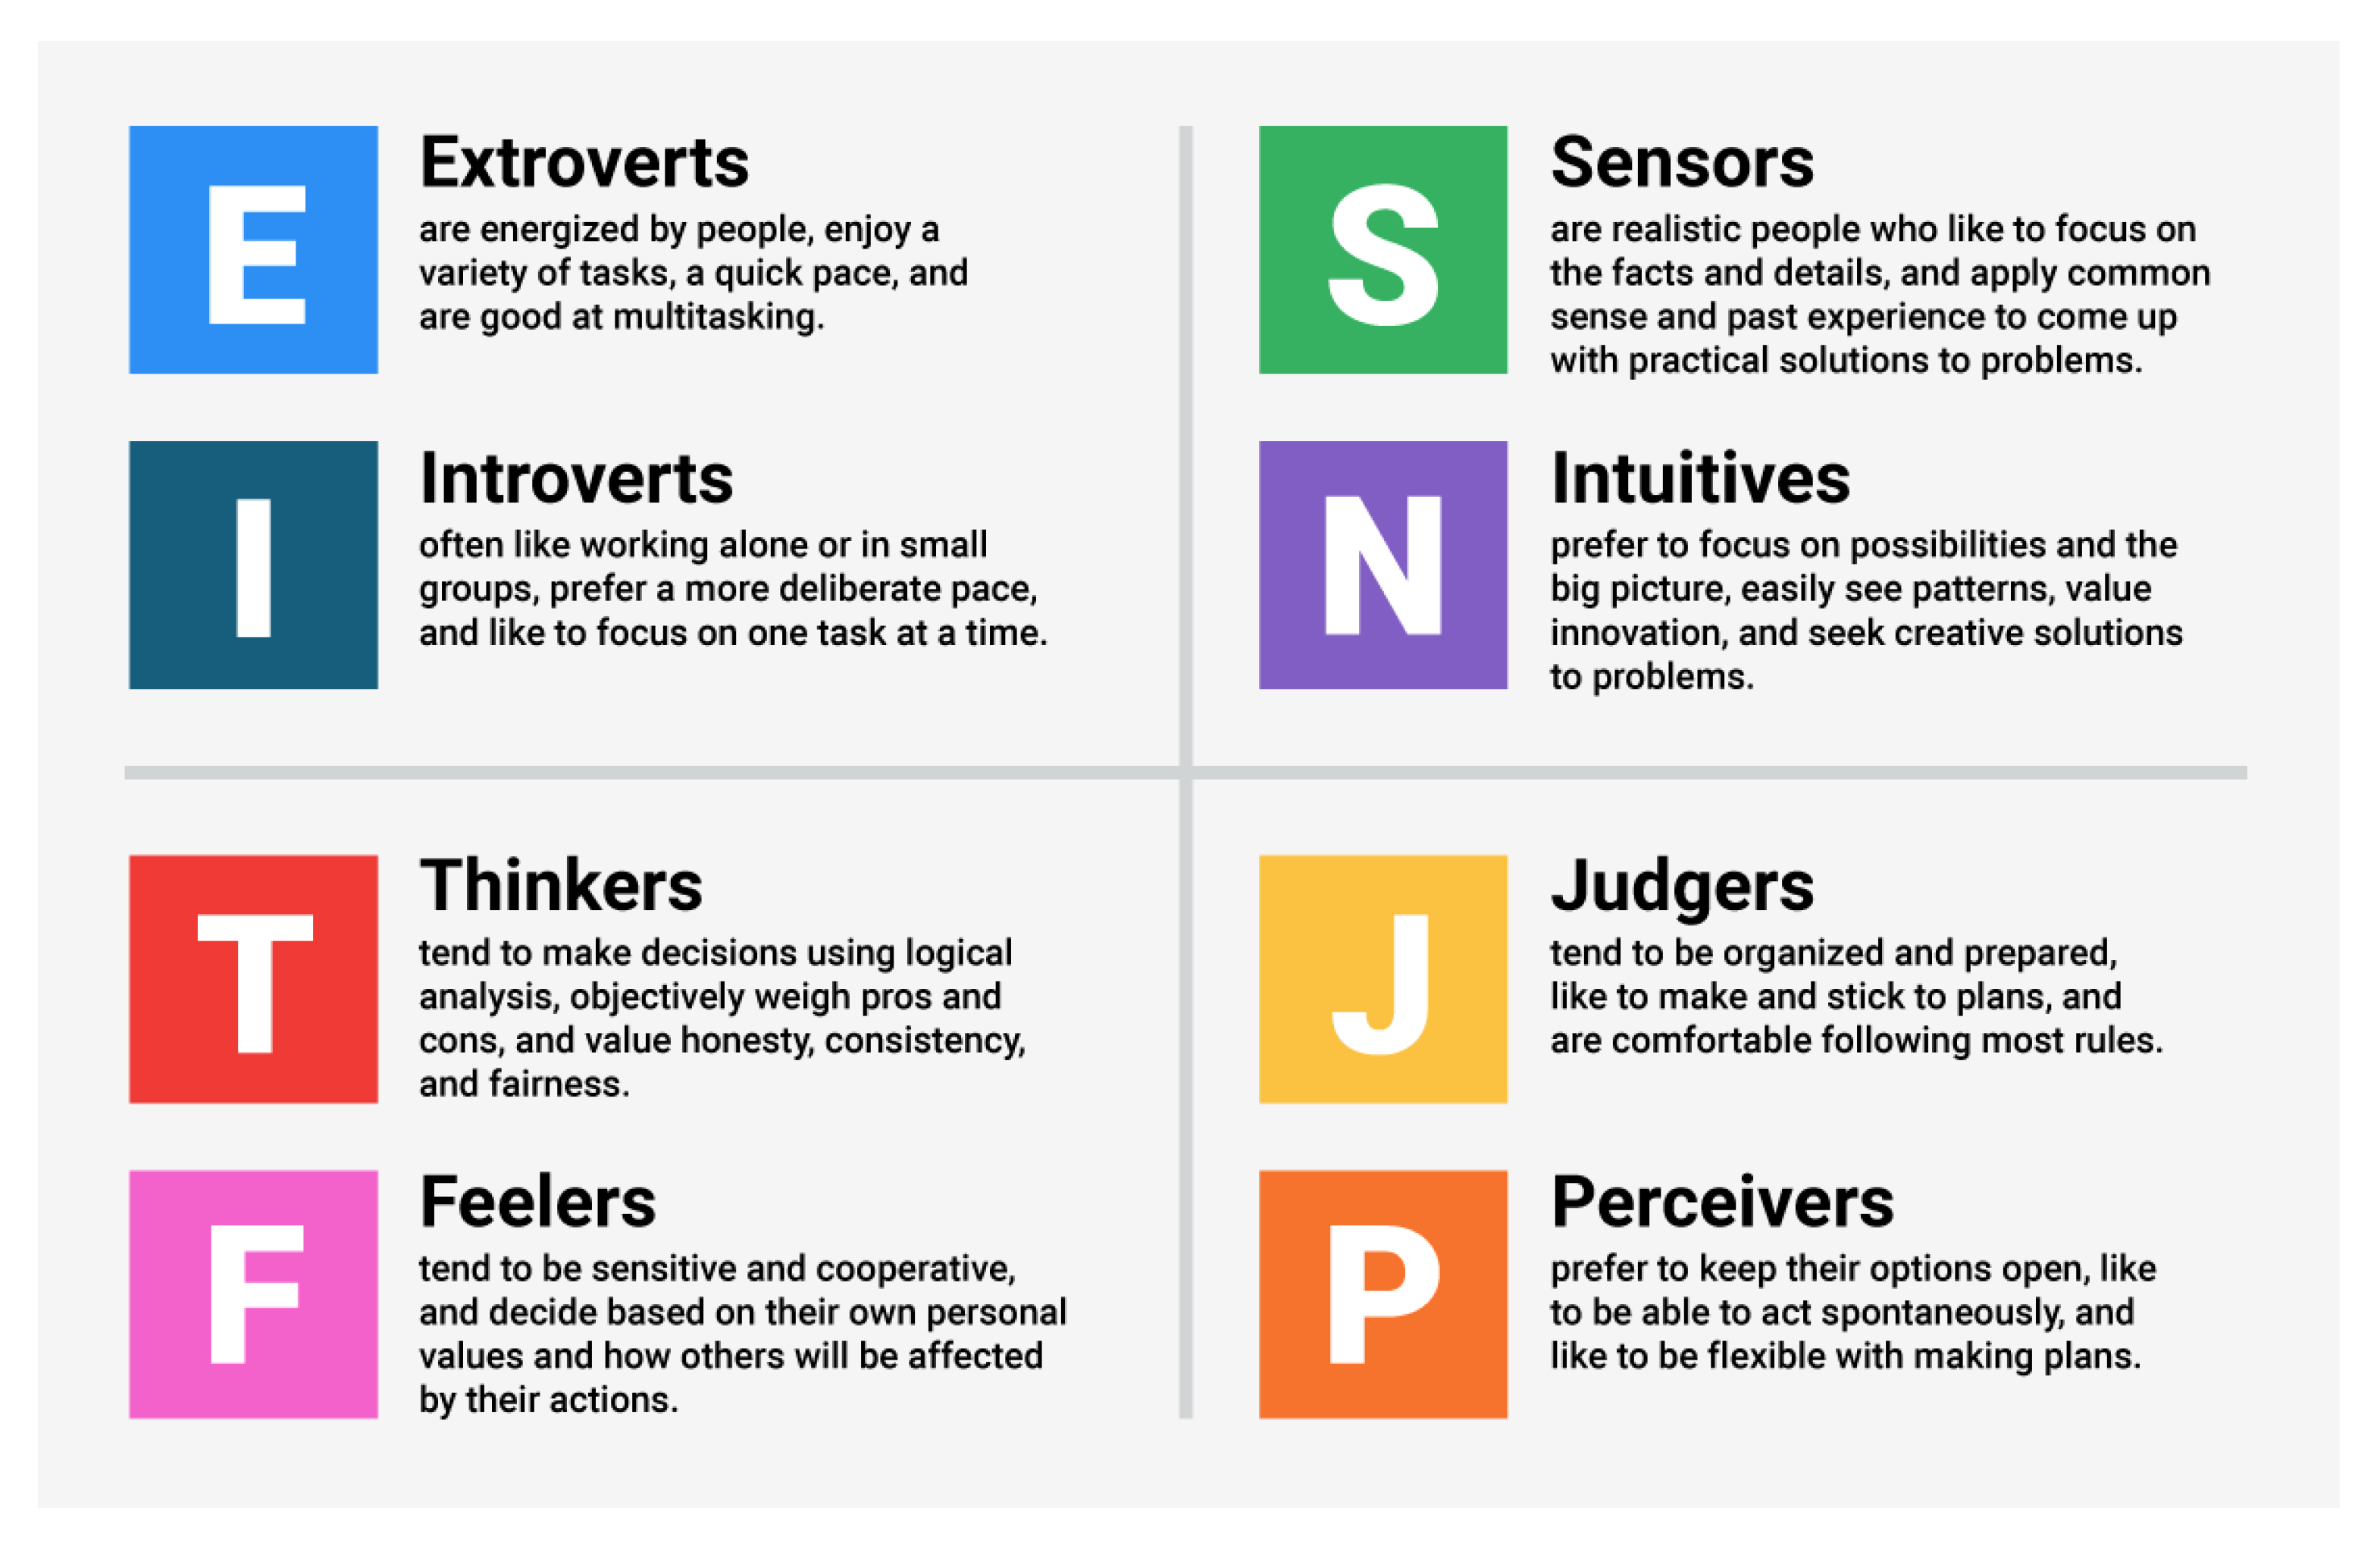 MBTI personality categories